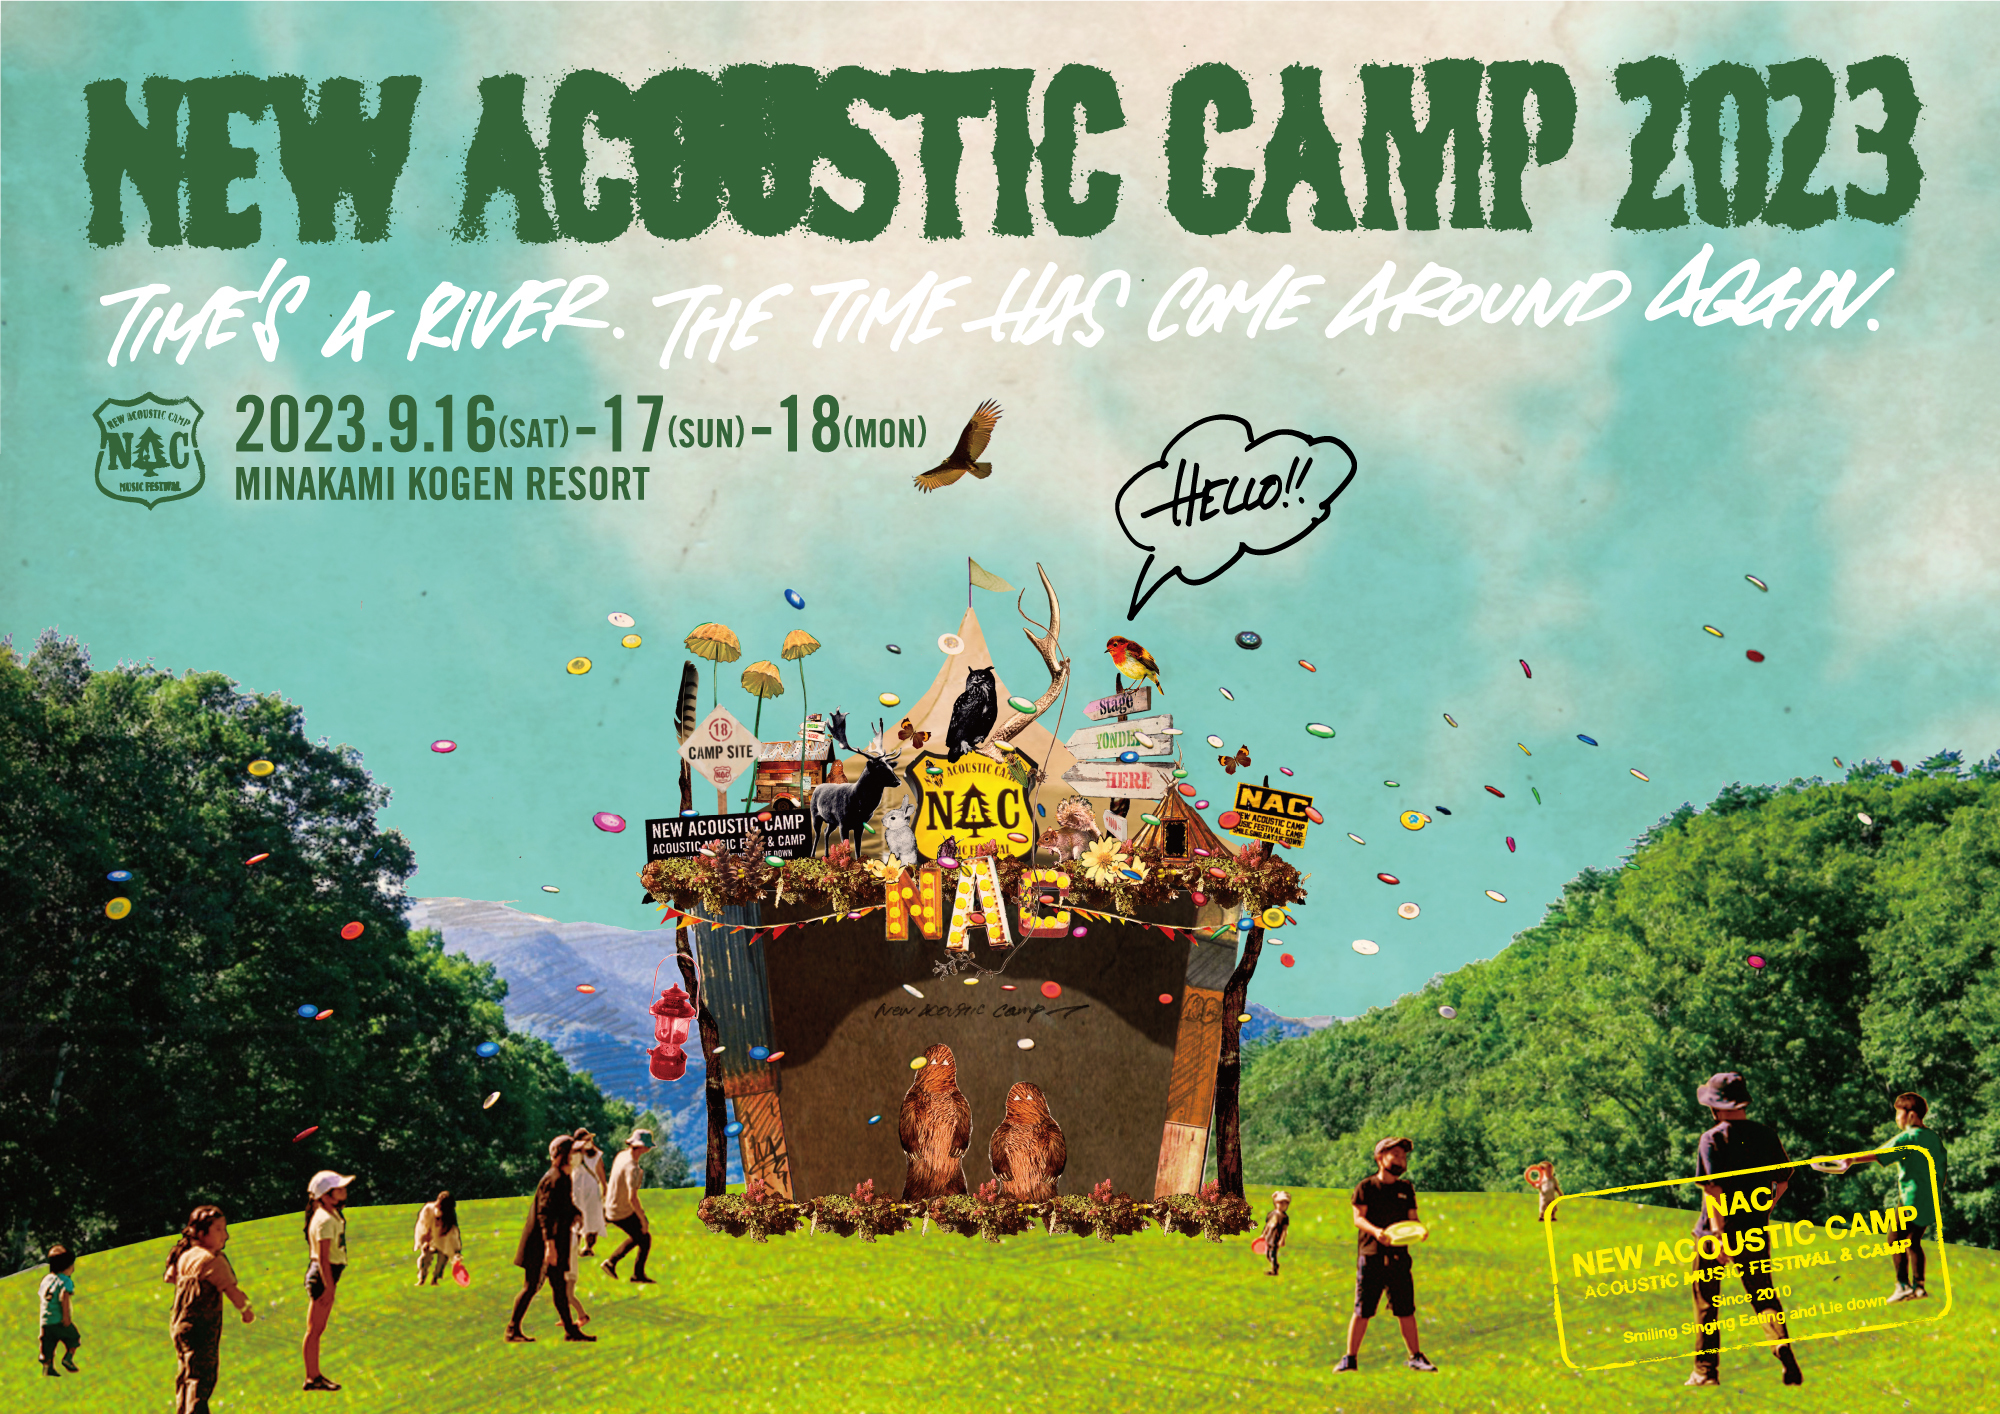 『New Acoustic Camp 2023』